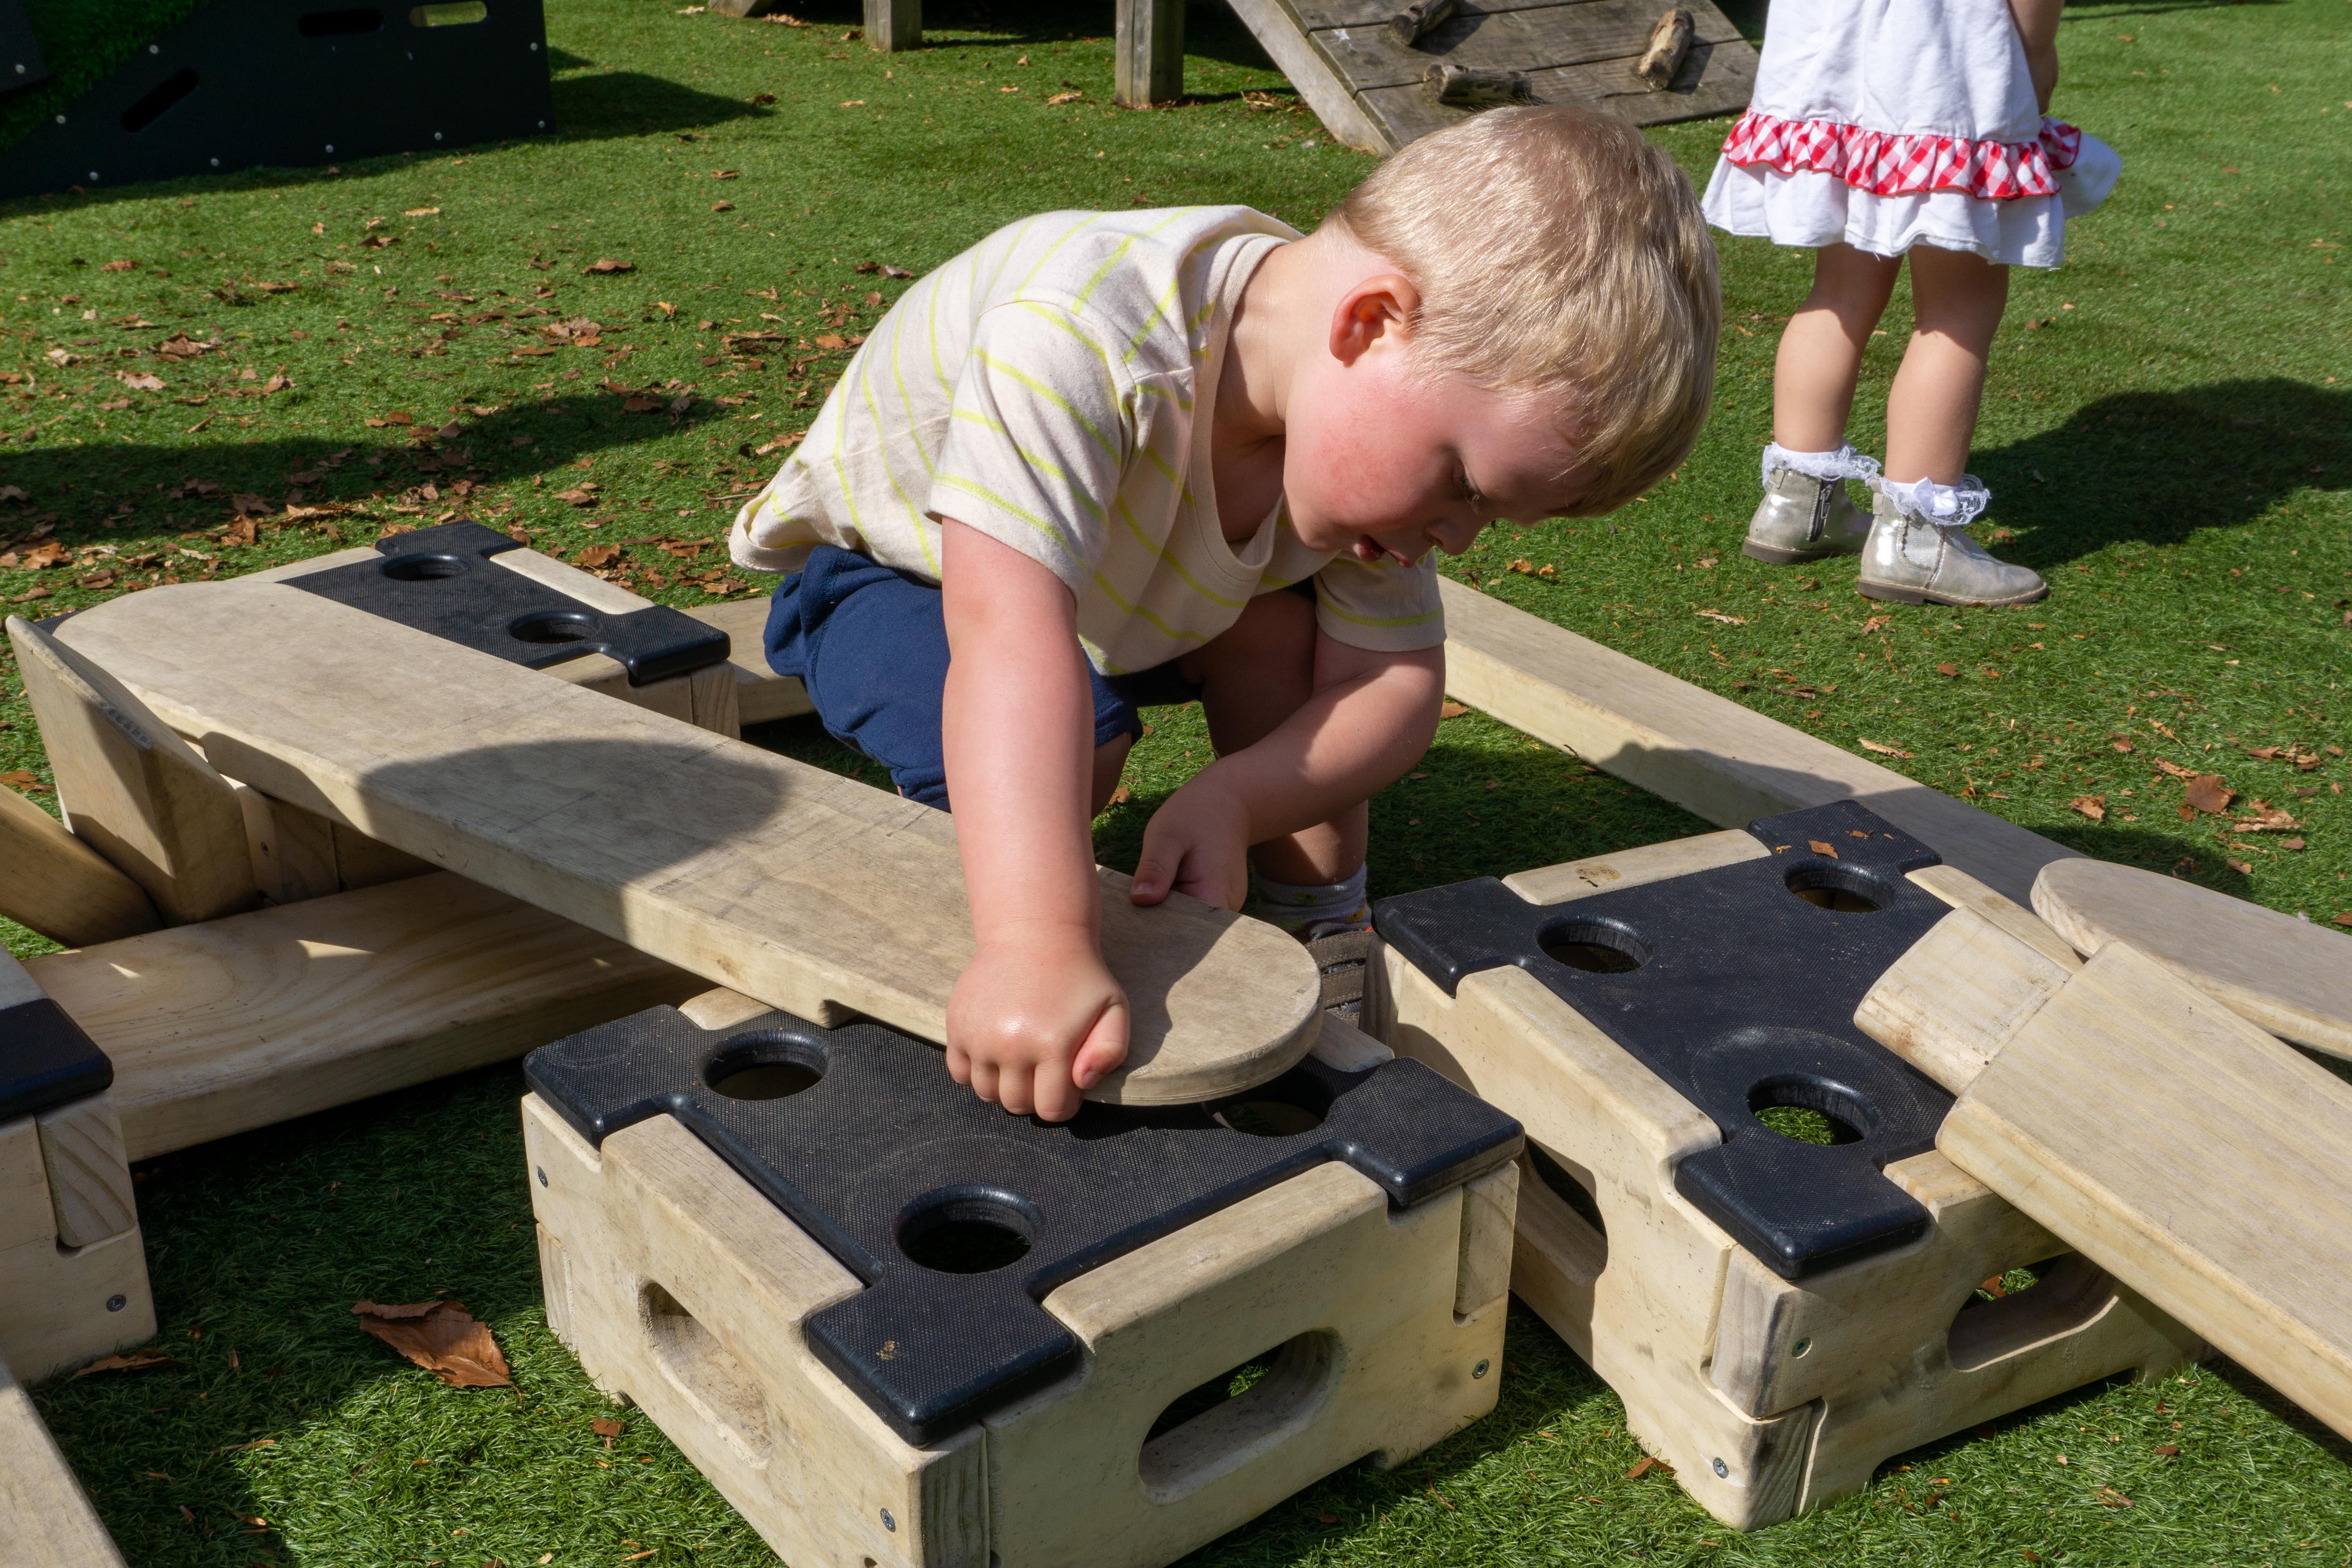 A close up of a little boy connecting a wooden plank to a wooden block. The plank and block are a part of the Play Builder set, which is set up on an artificial grass playground at Kindred White Post, A little girls legs can be seen in the background walking away.